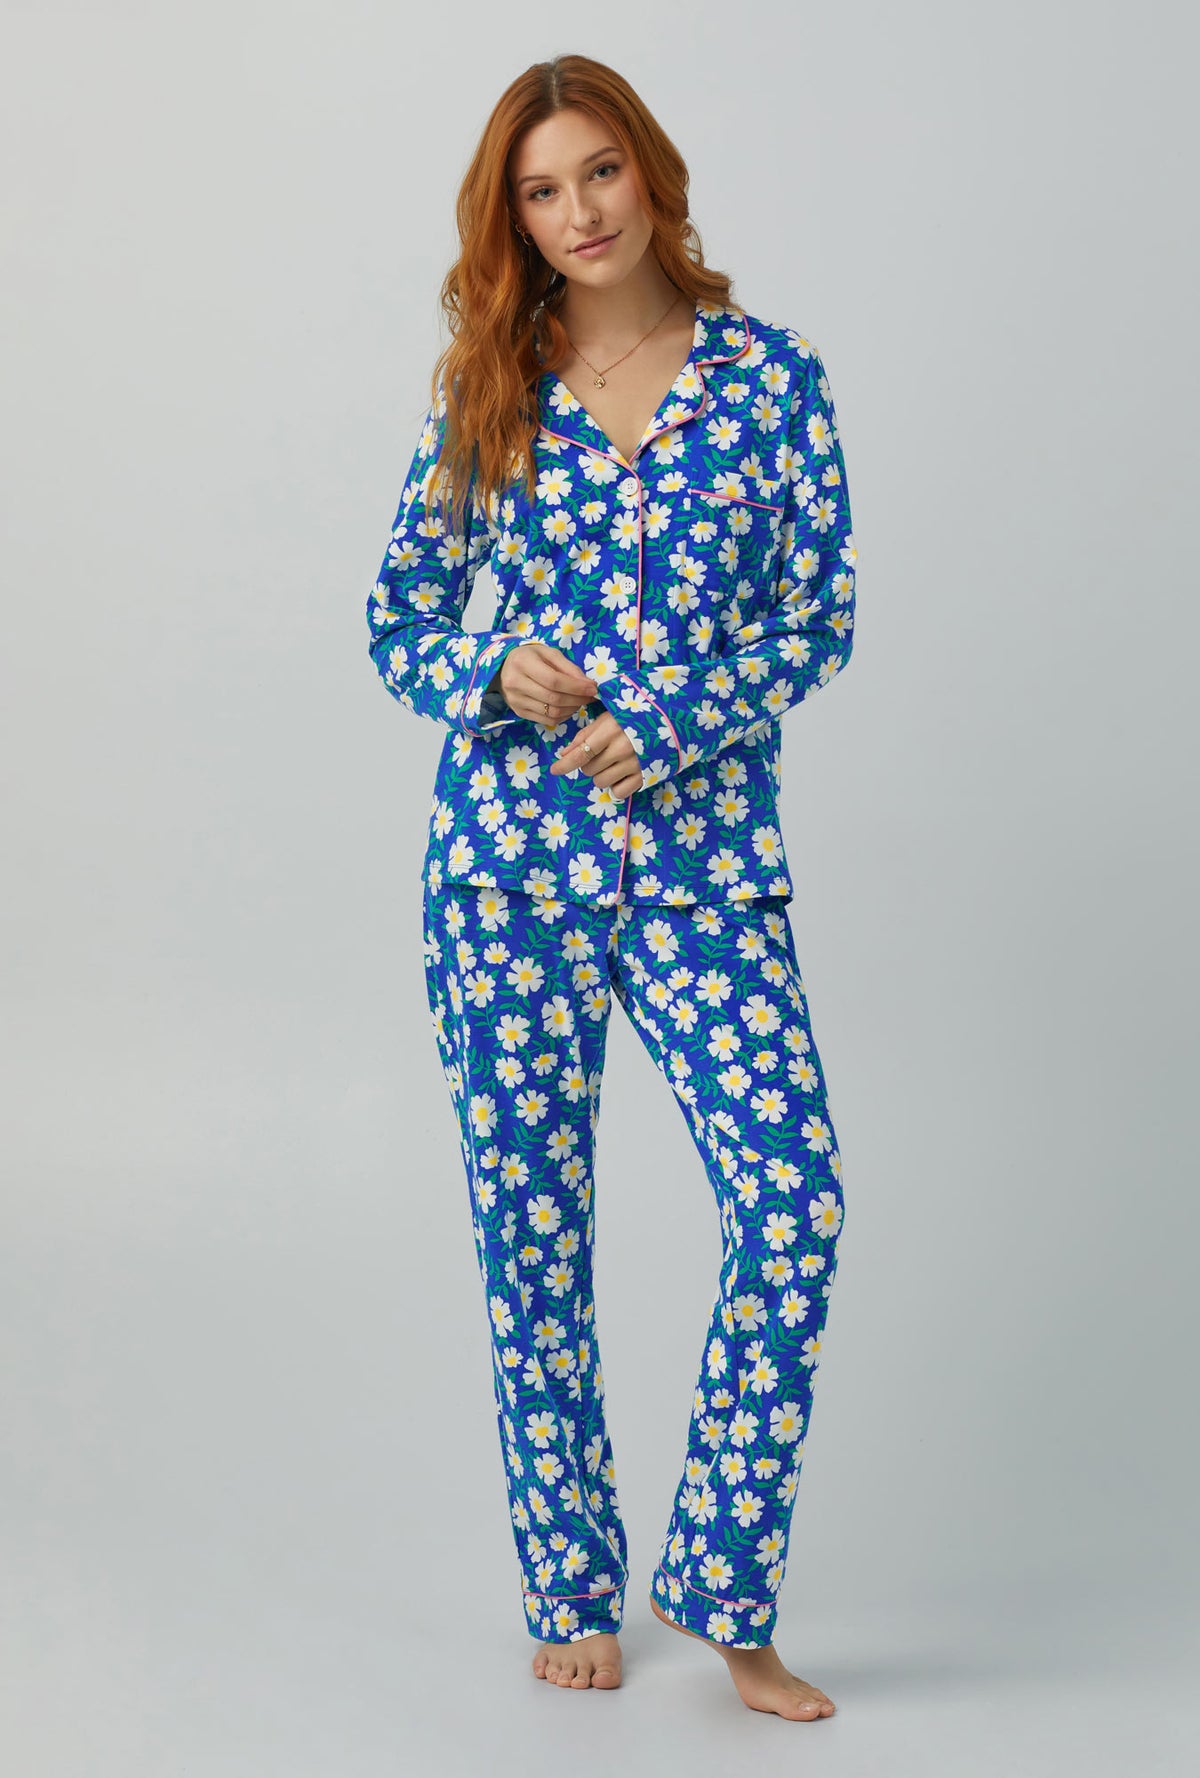 A lady wearing Long Sleeve Classic Stretch Jersey PJ Set with lazy daisy print